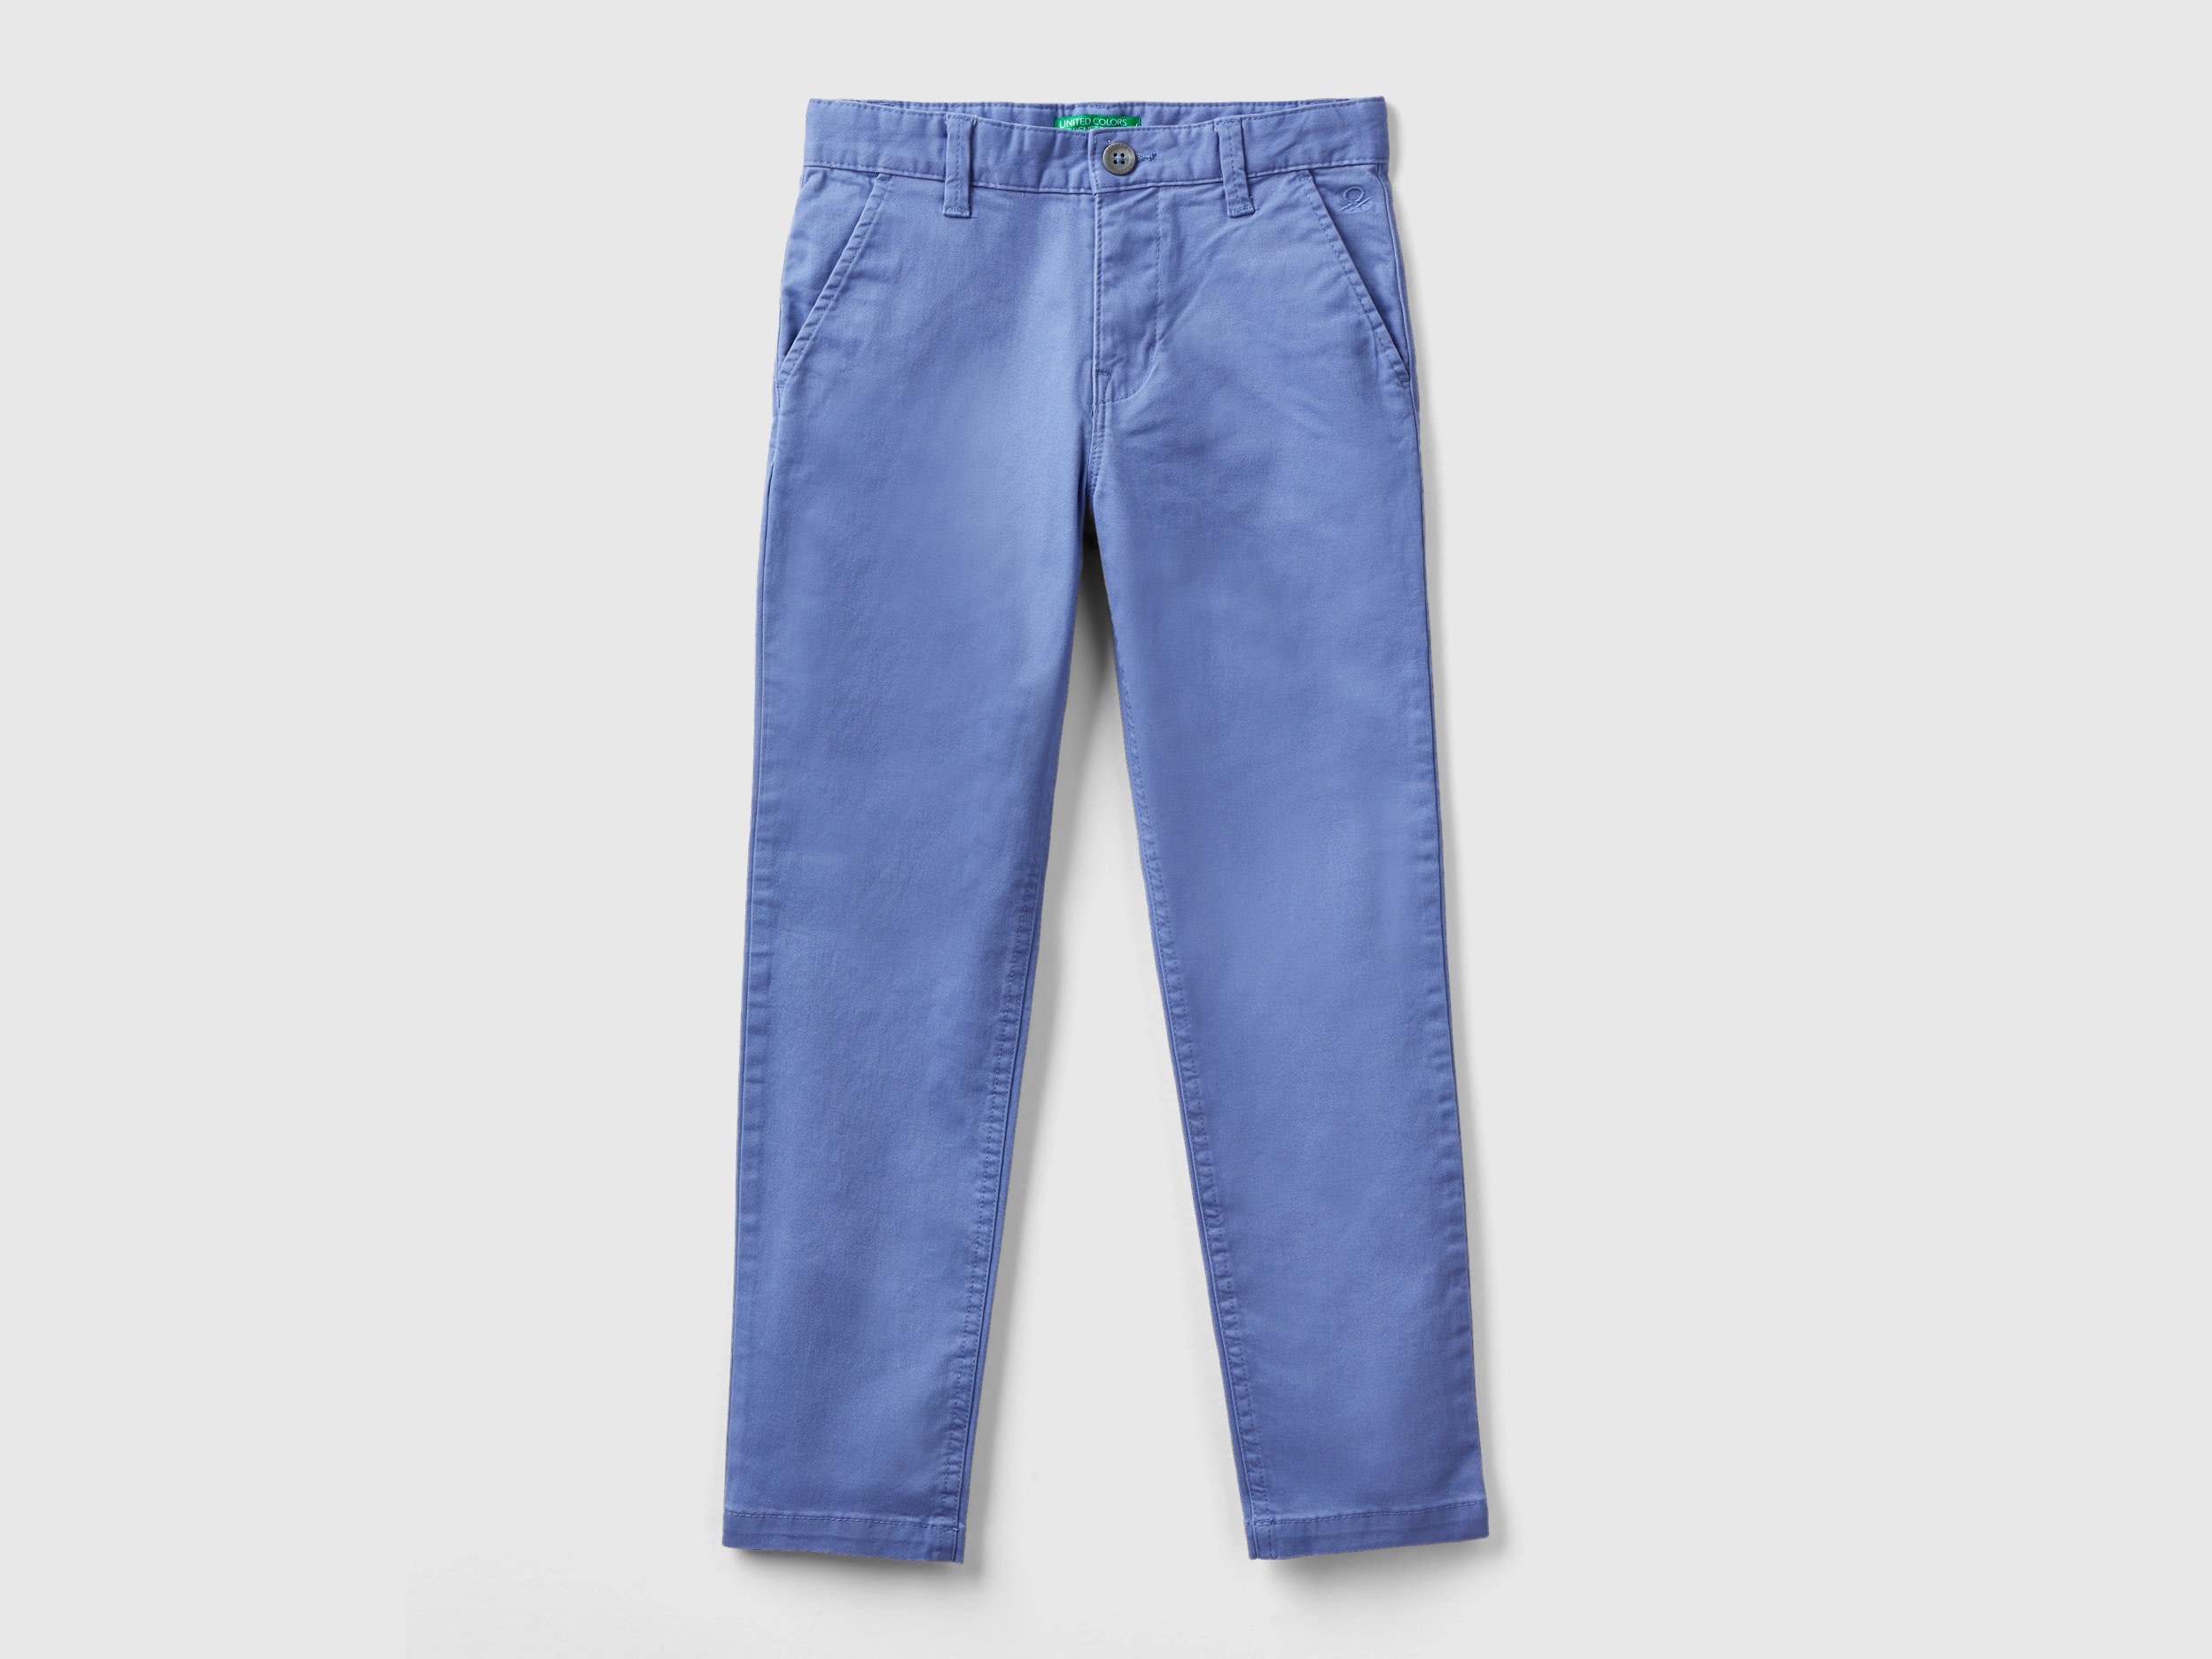 Benetton, Slim Fit Chinos In Stretch Cotton, size S, Light Blue, Kids